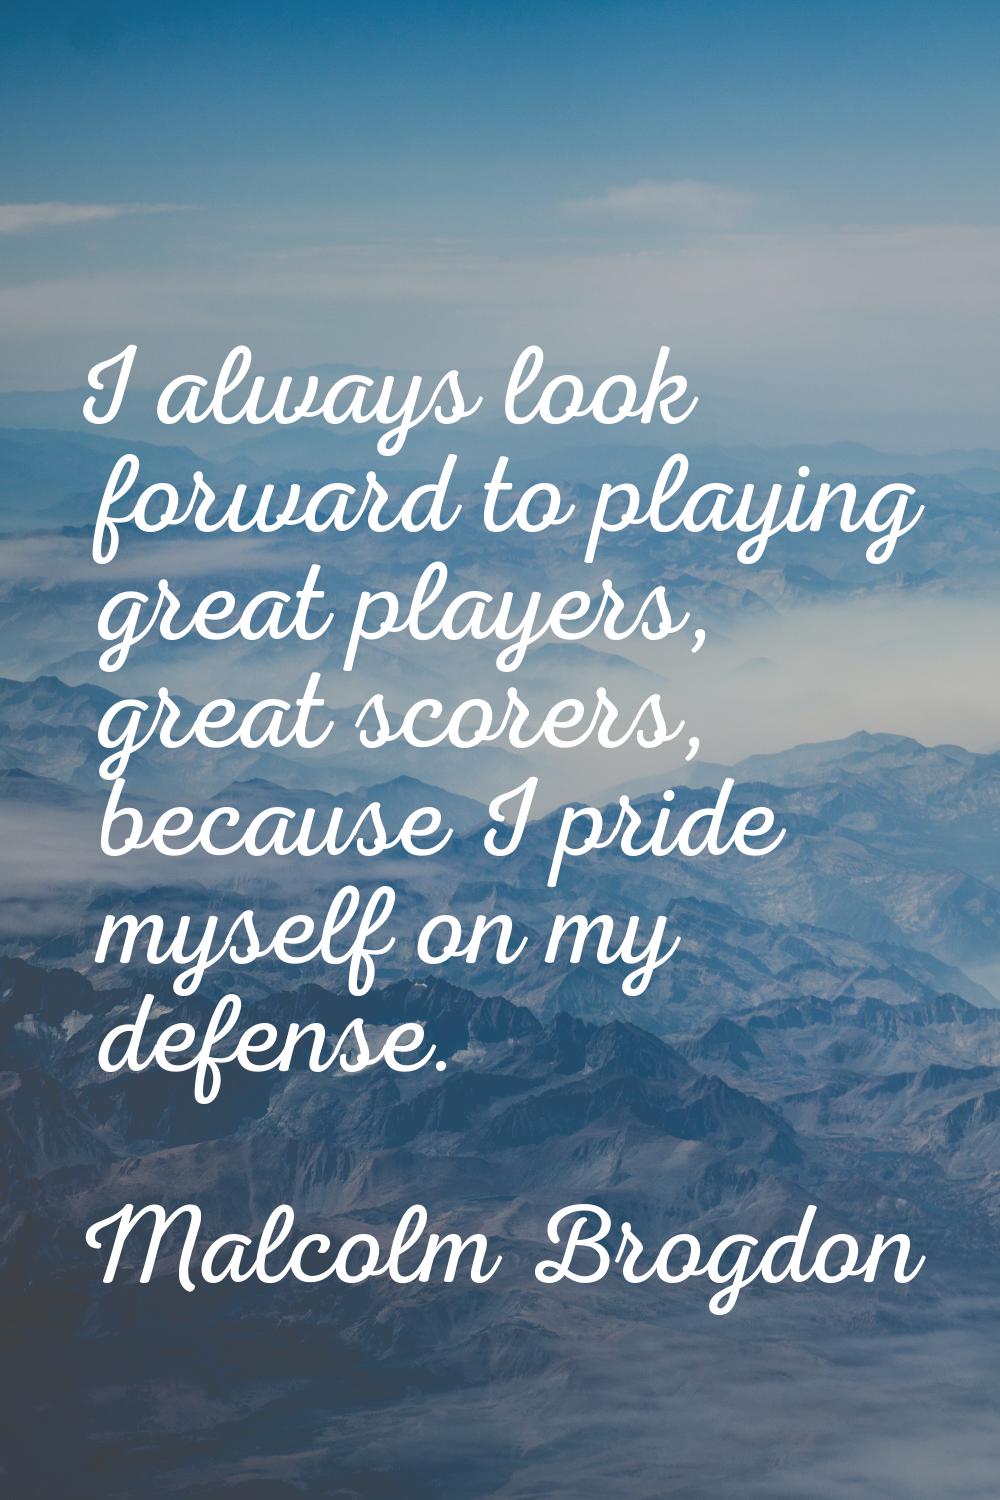 I always look forward to playing great players, great scorers, because I pride myself on my defense